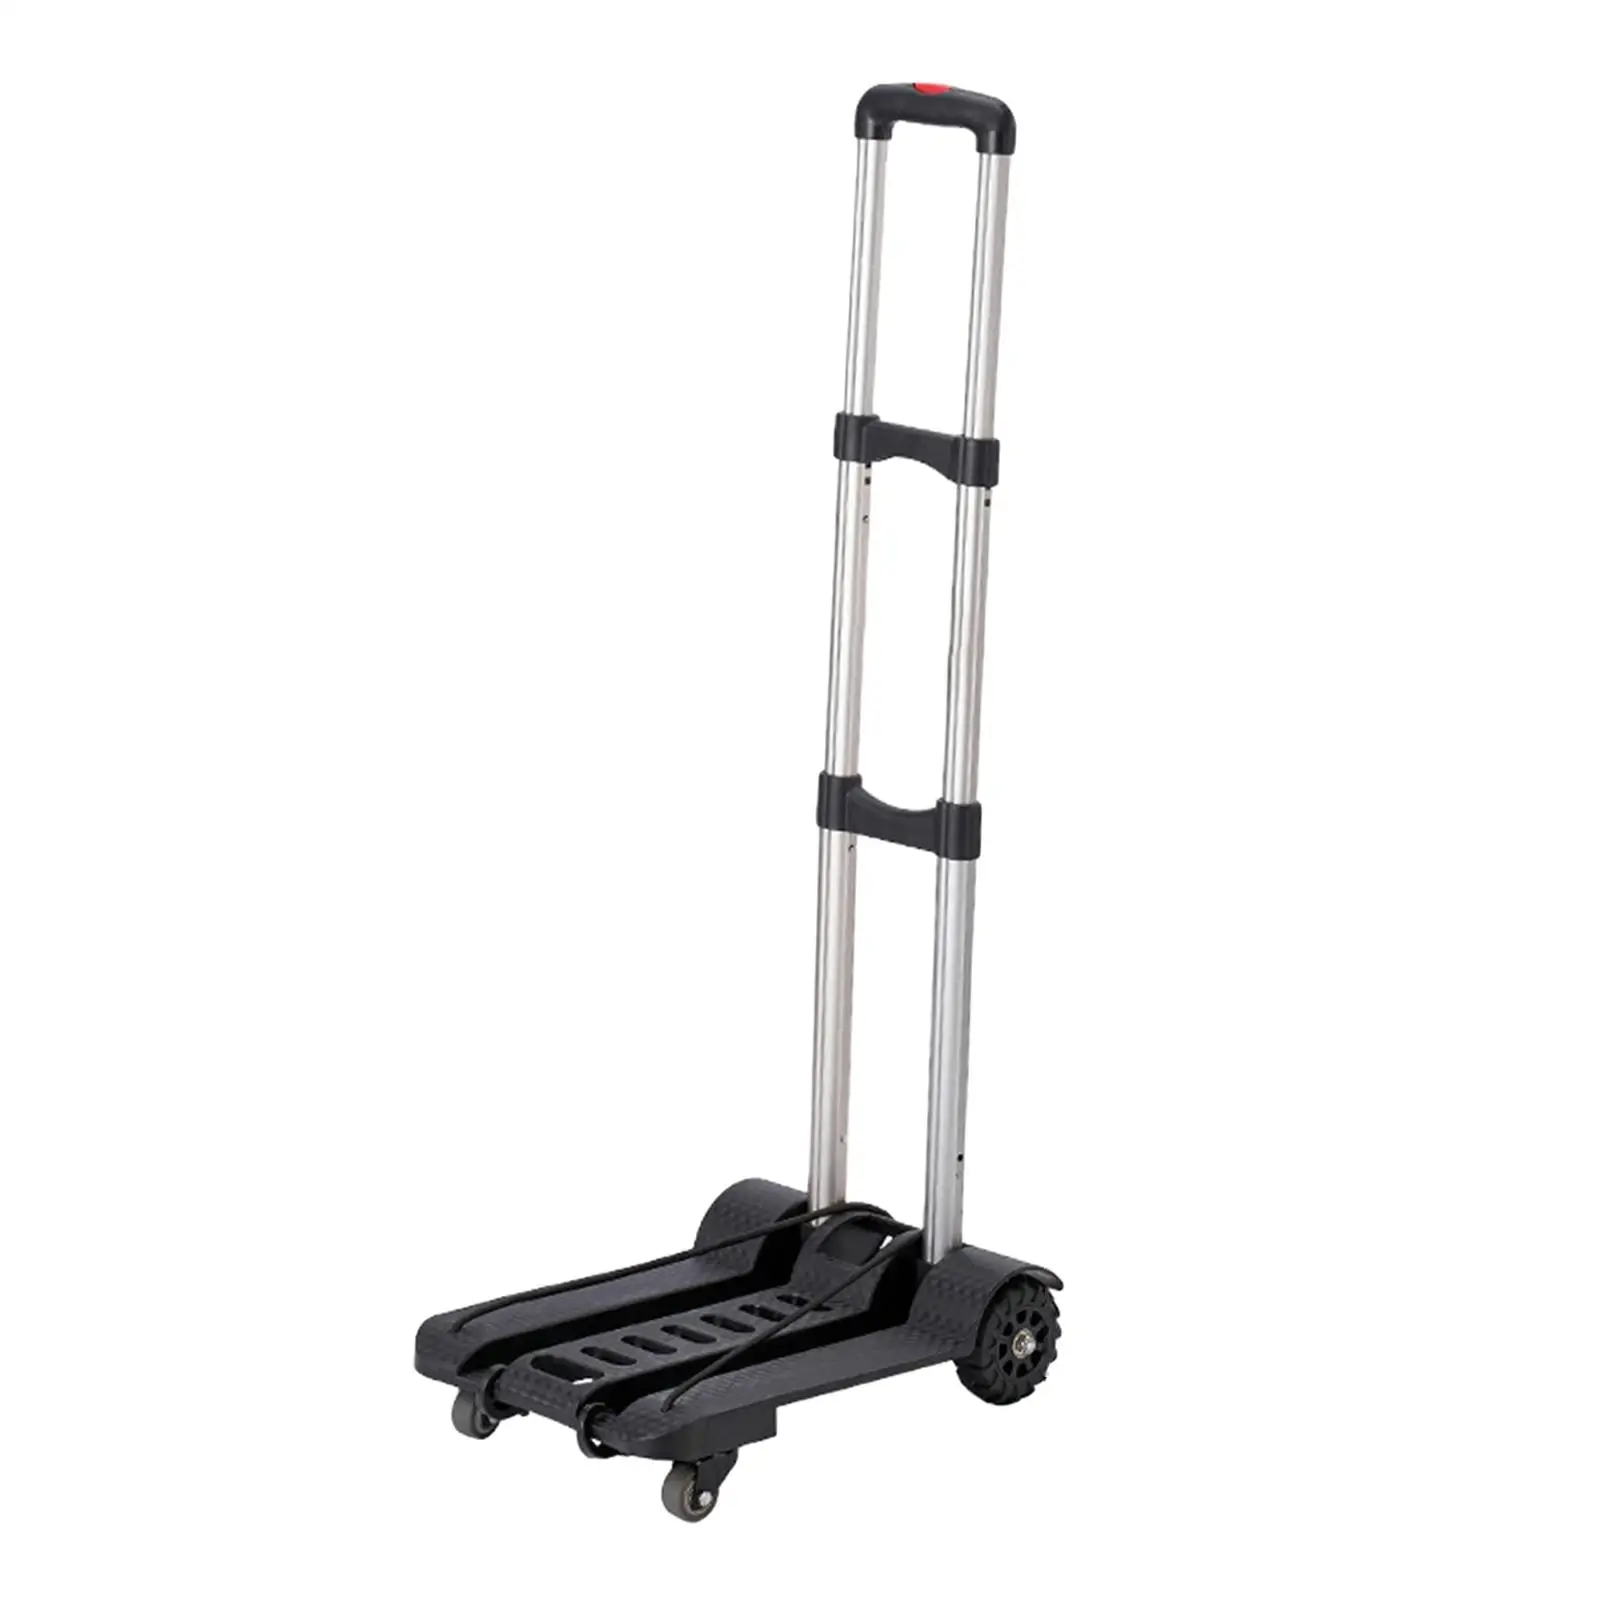 Luggage Trolley Cart Transportation 110lbs Office Moving Folding Hand Truck